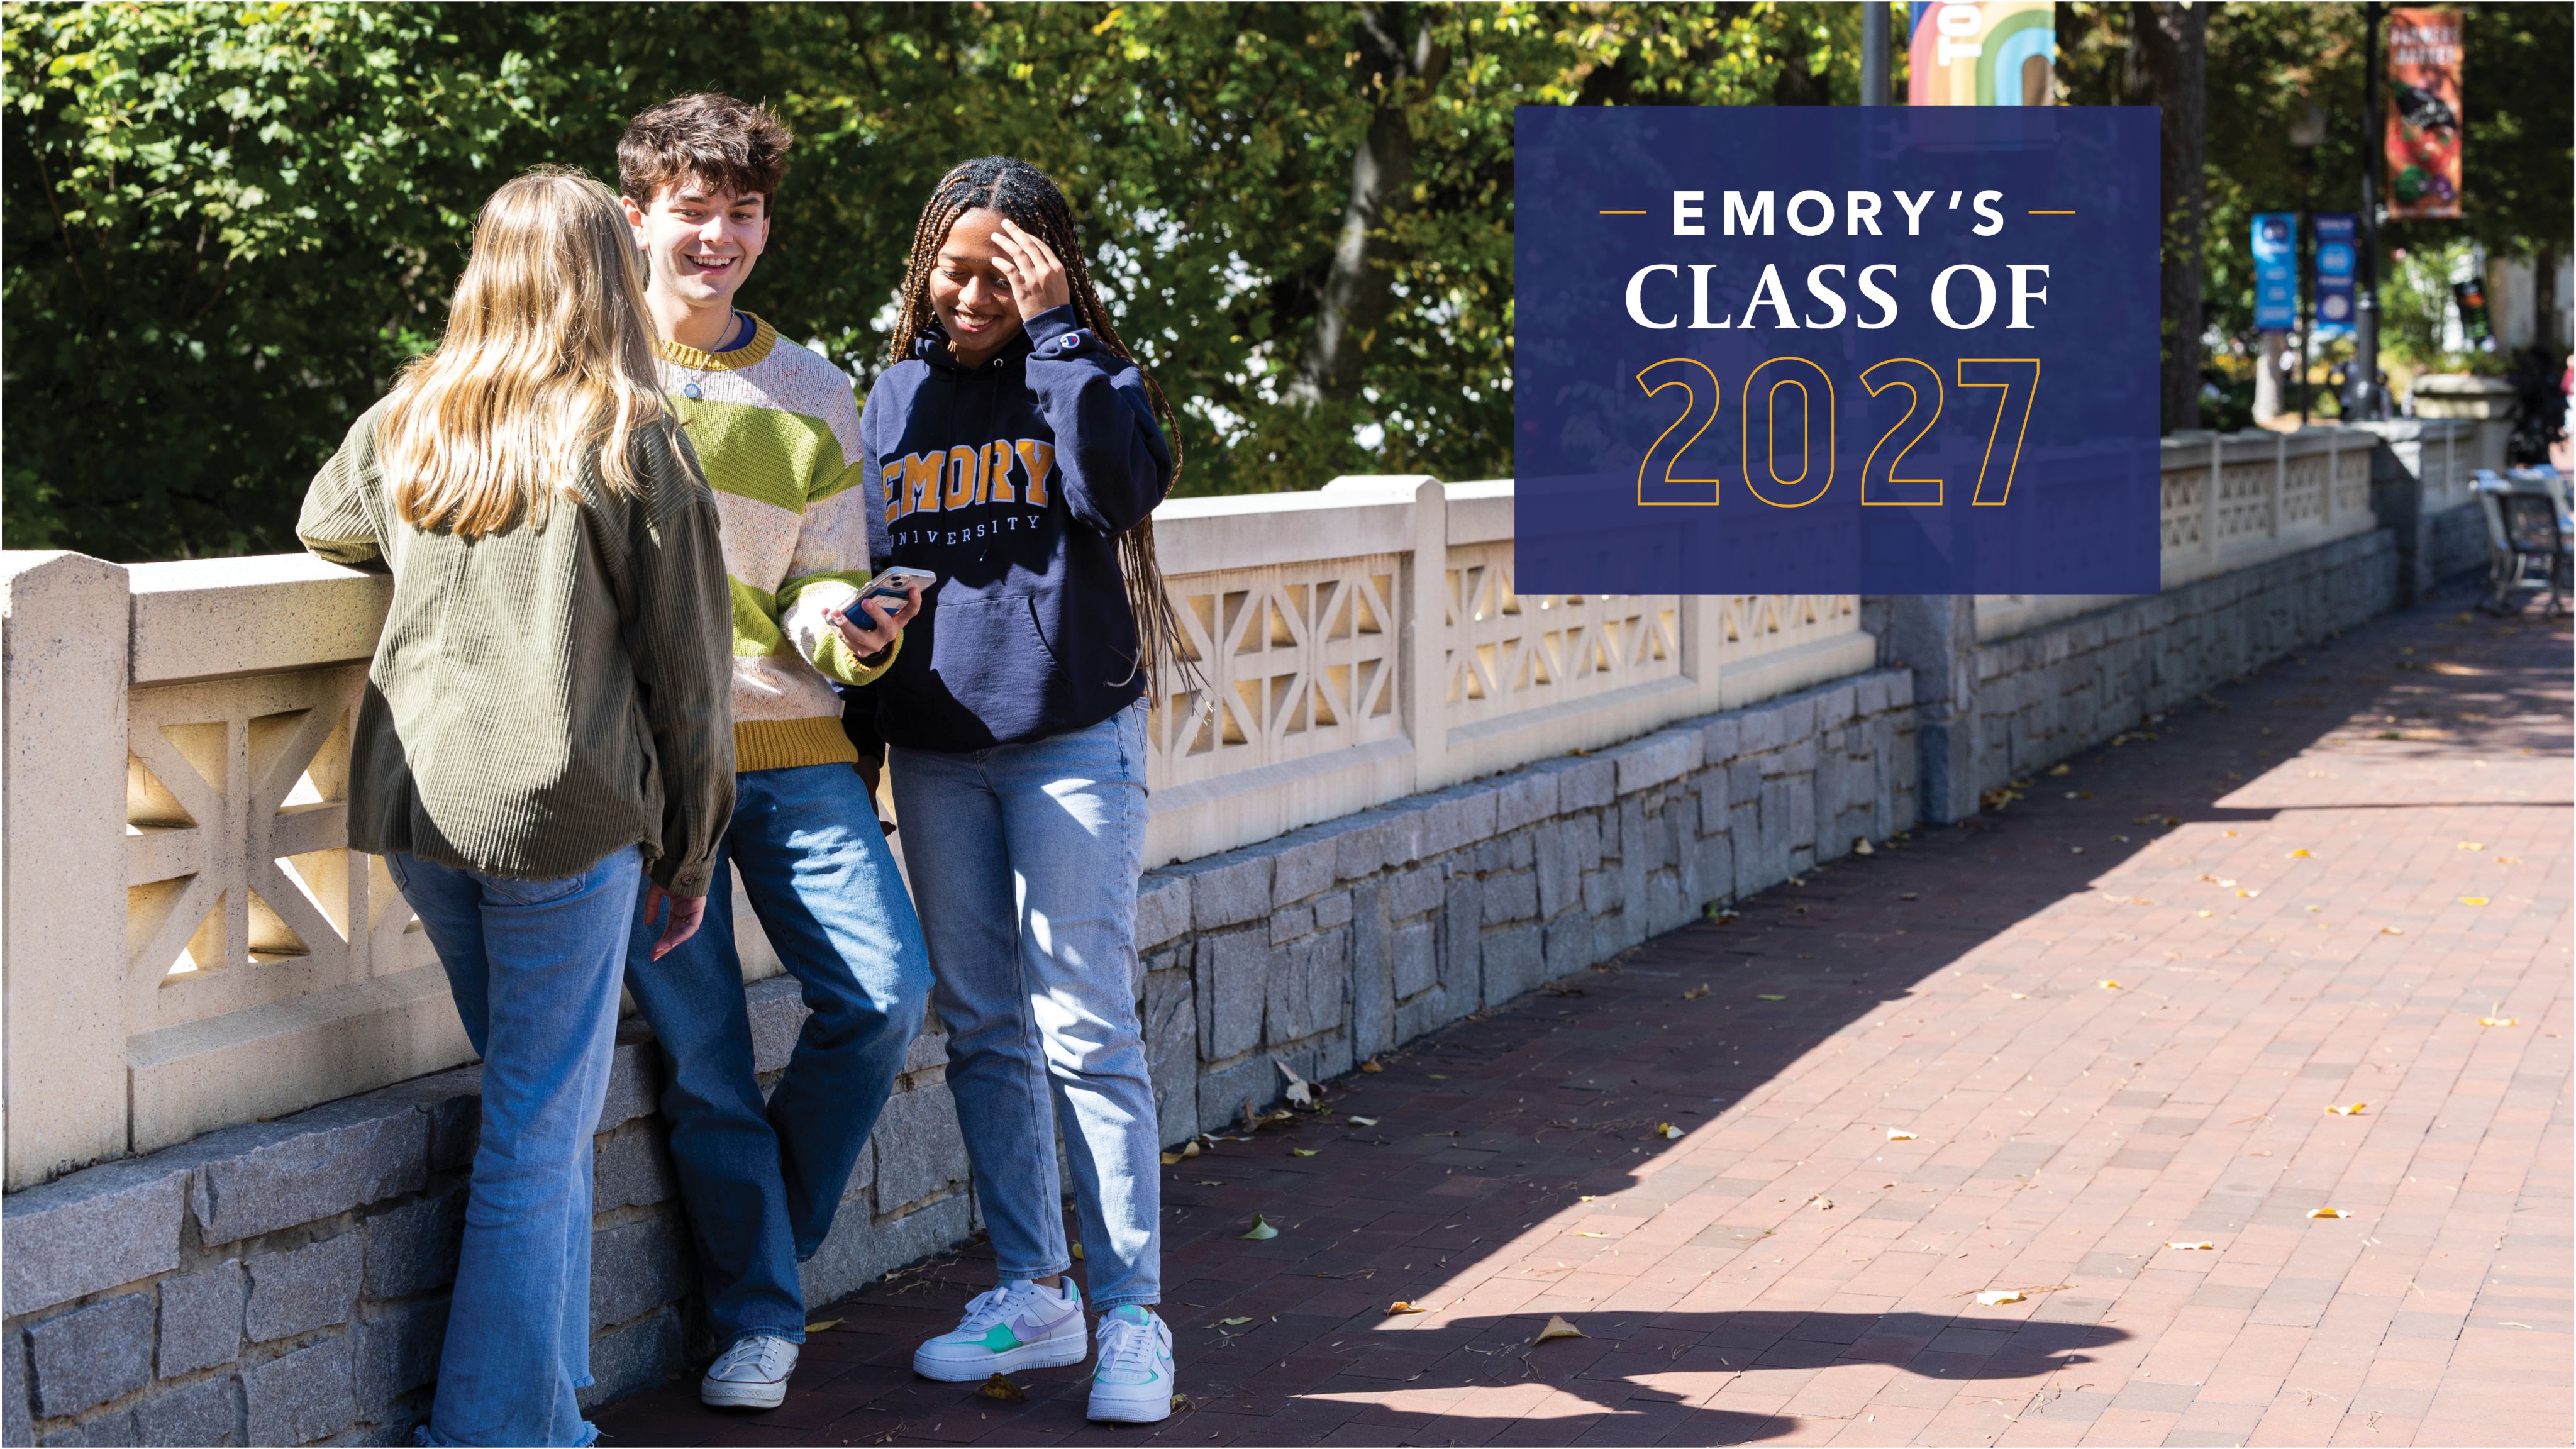 Emory's Class of 2027 with background photo of two students walking on a sidewalk